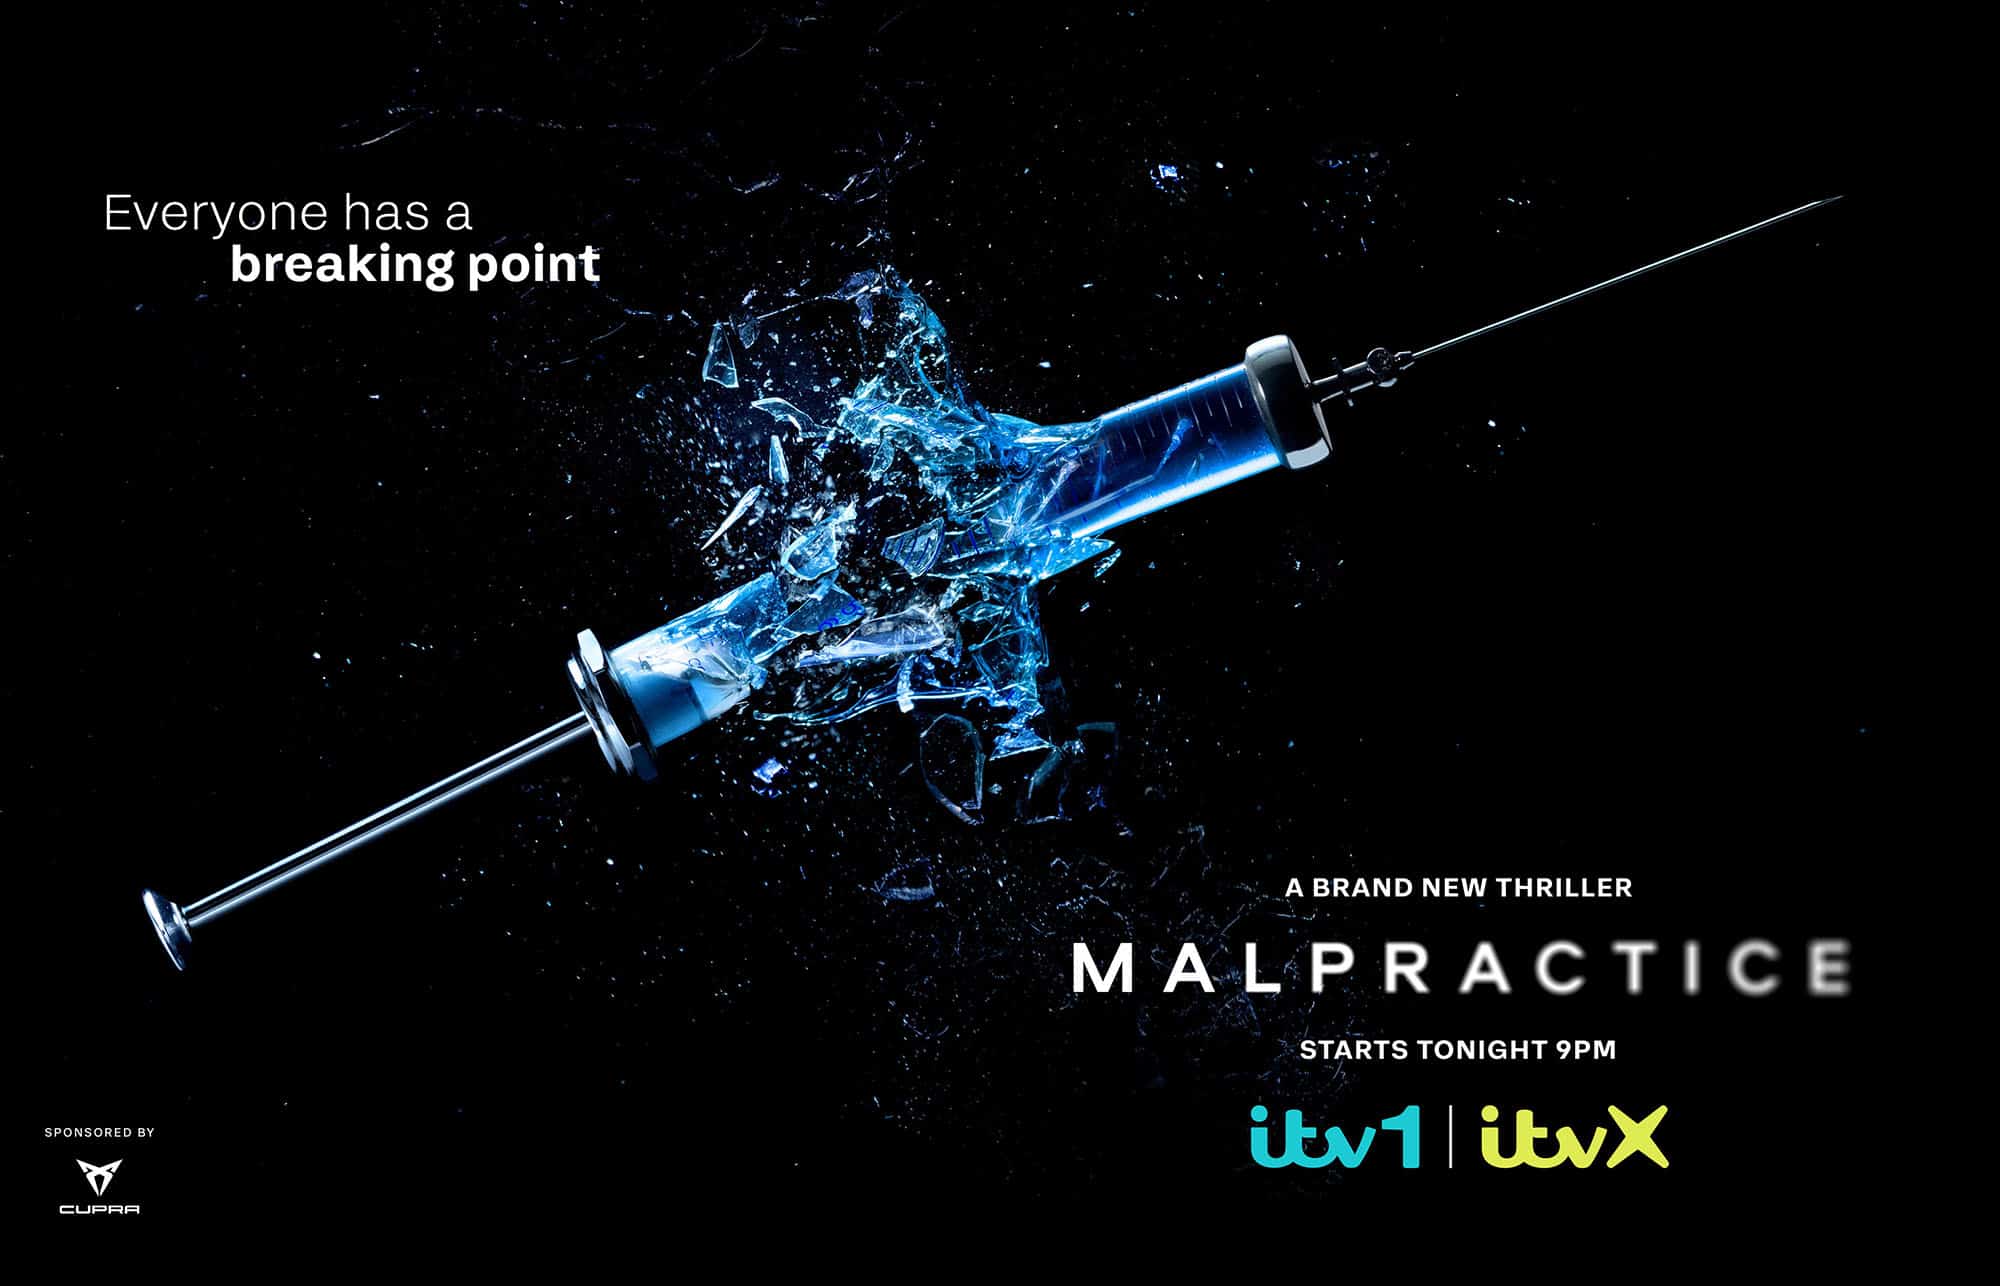 Glass syringe with blue liquid in mid explosion on a black background